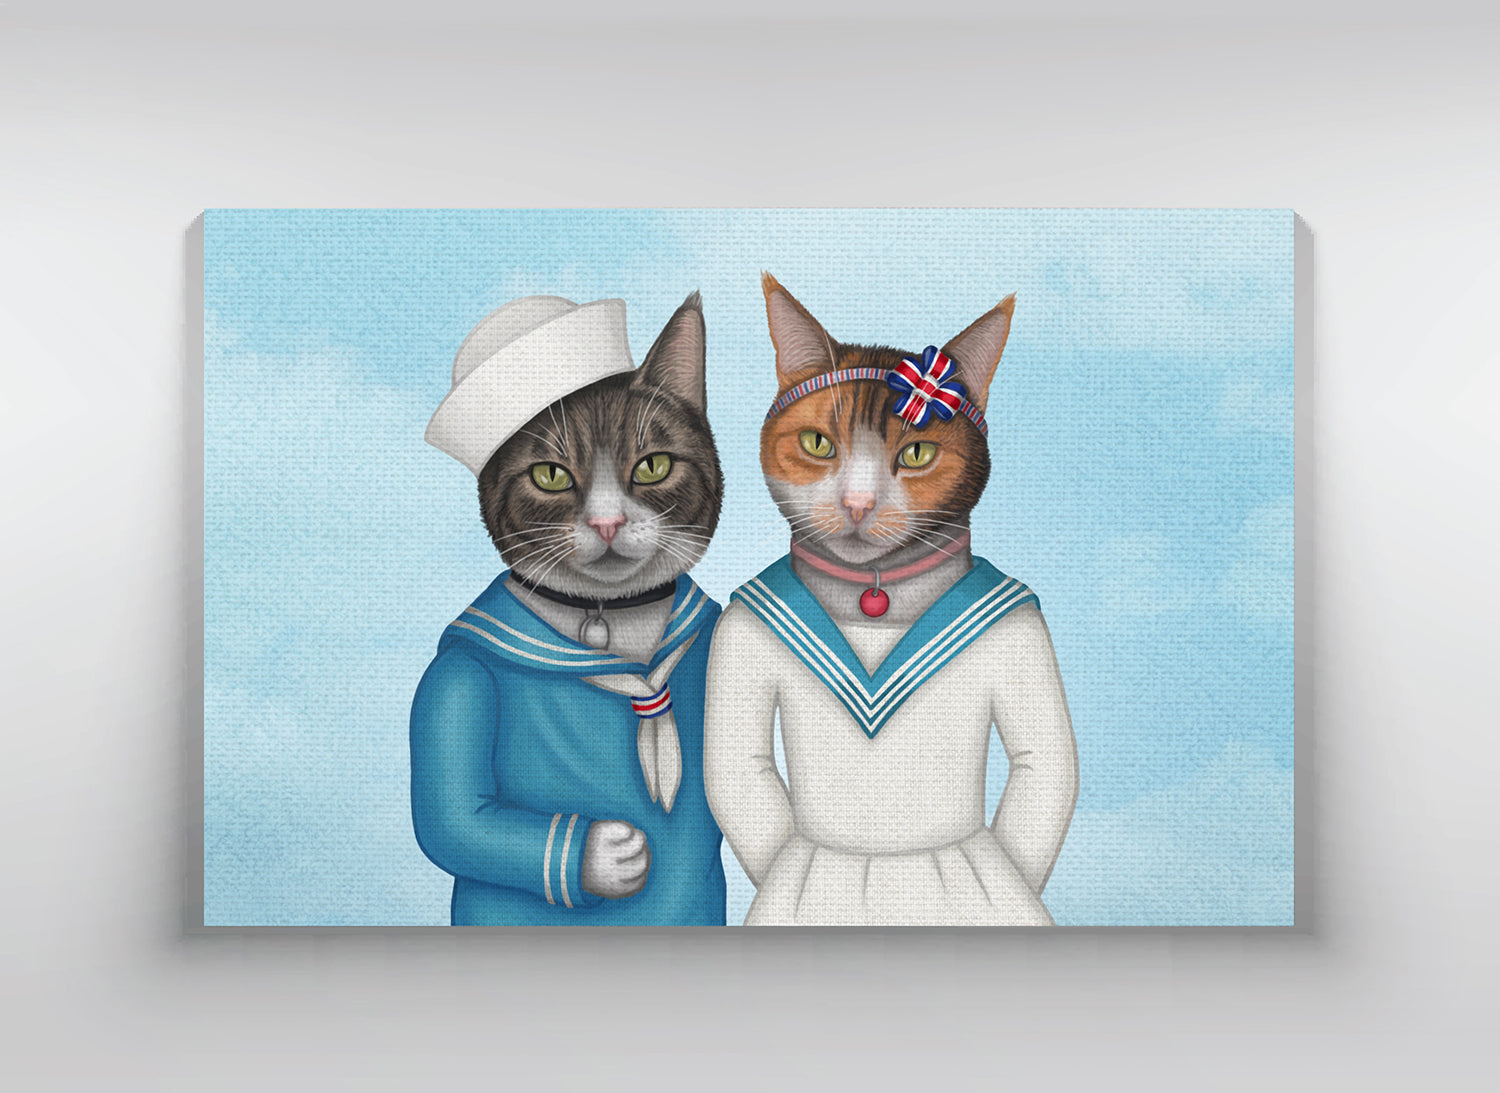 Canvas "Brothers and sisters are as close as hands and feet" (Cats)